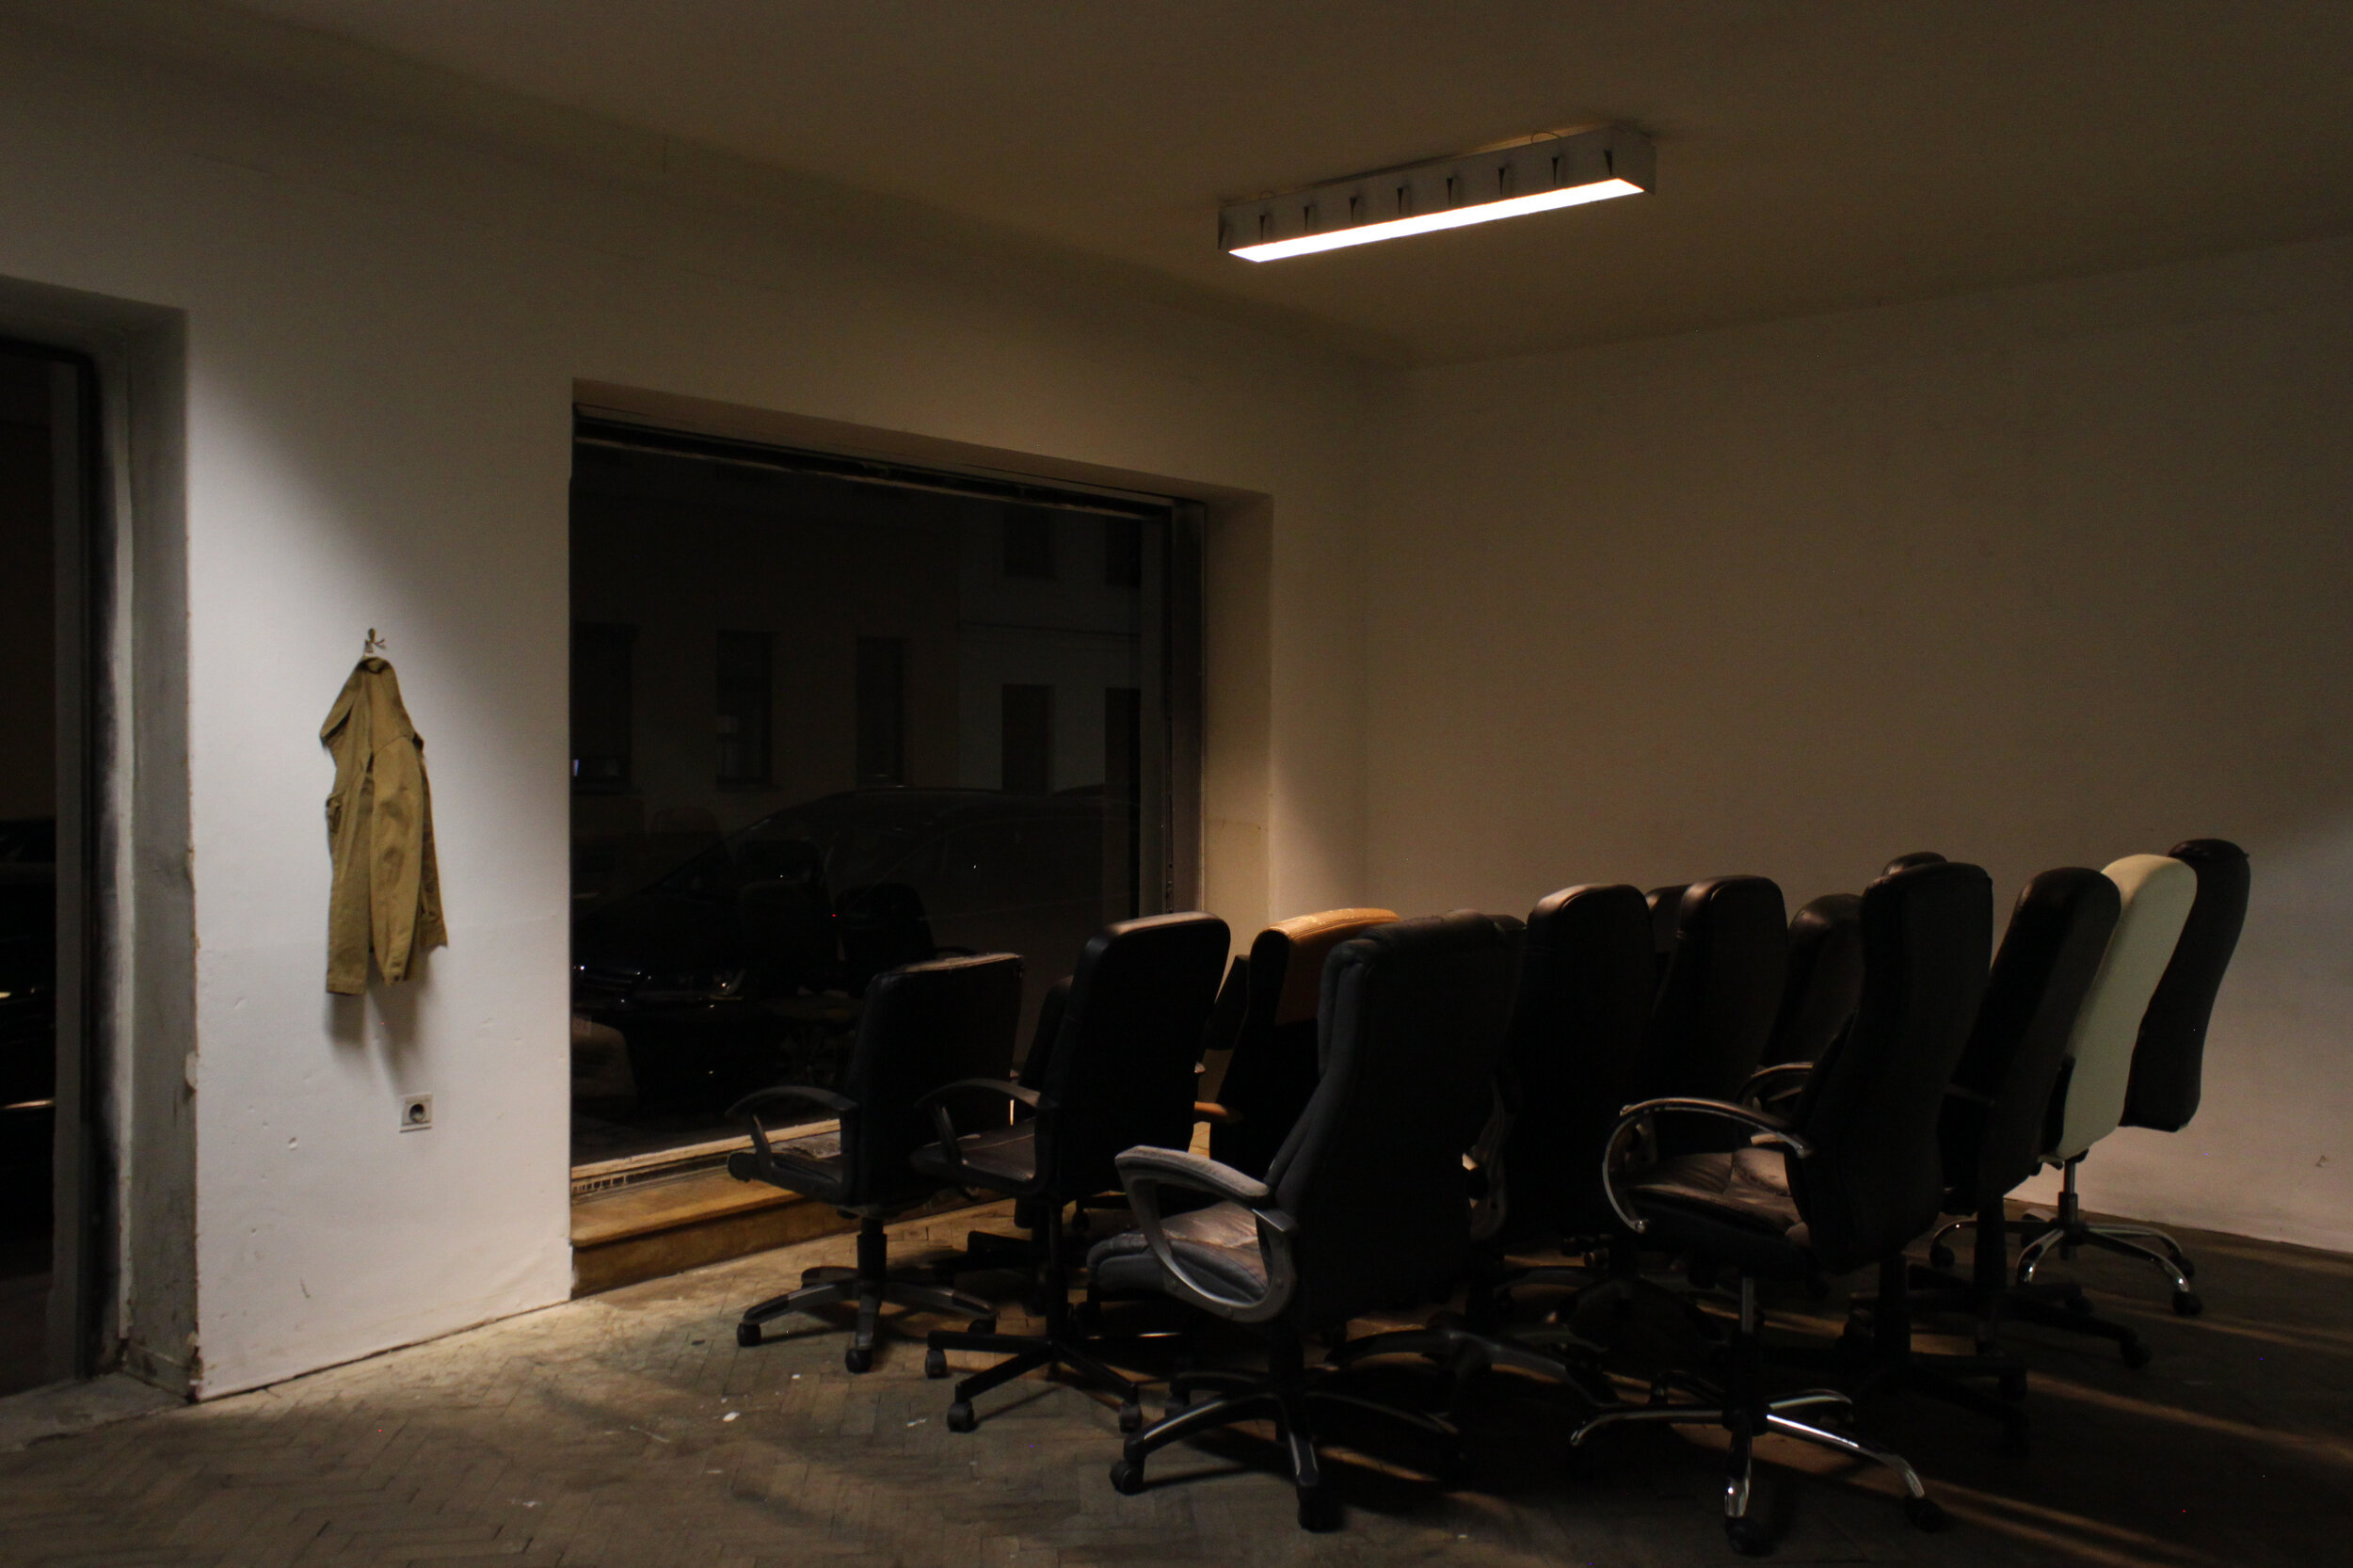   fig5 installation view (Room 2: No Peer Pressure Without Peers)  